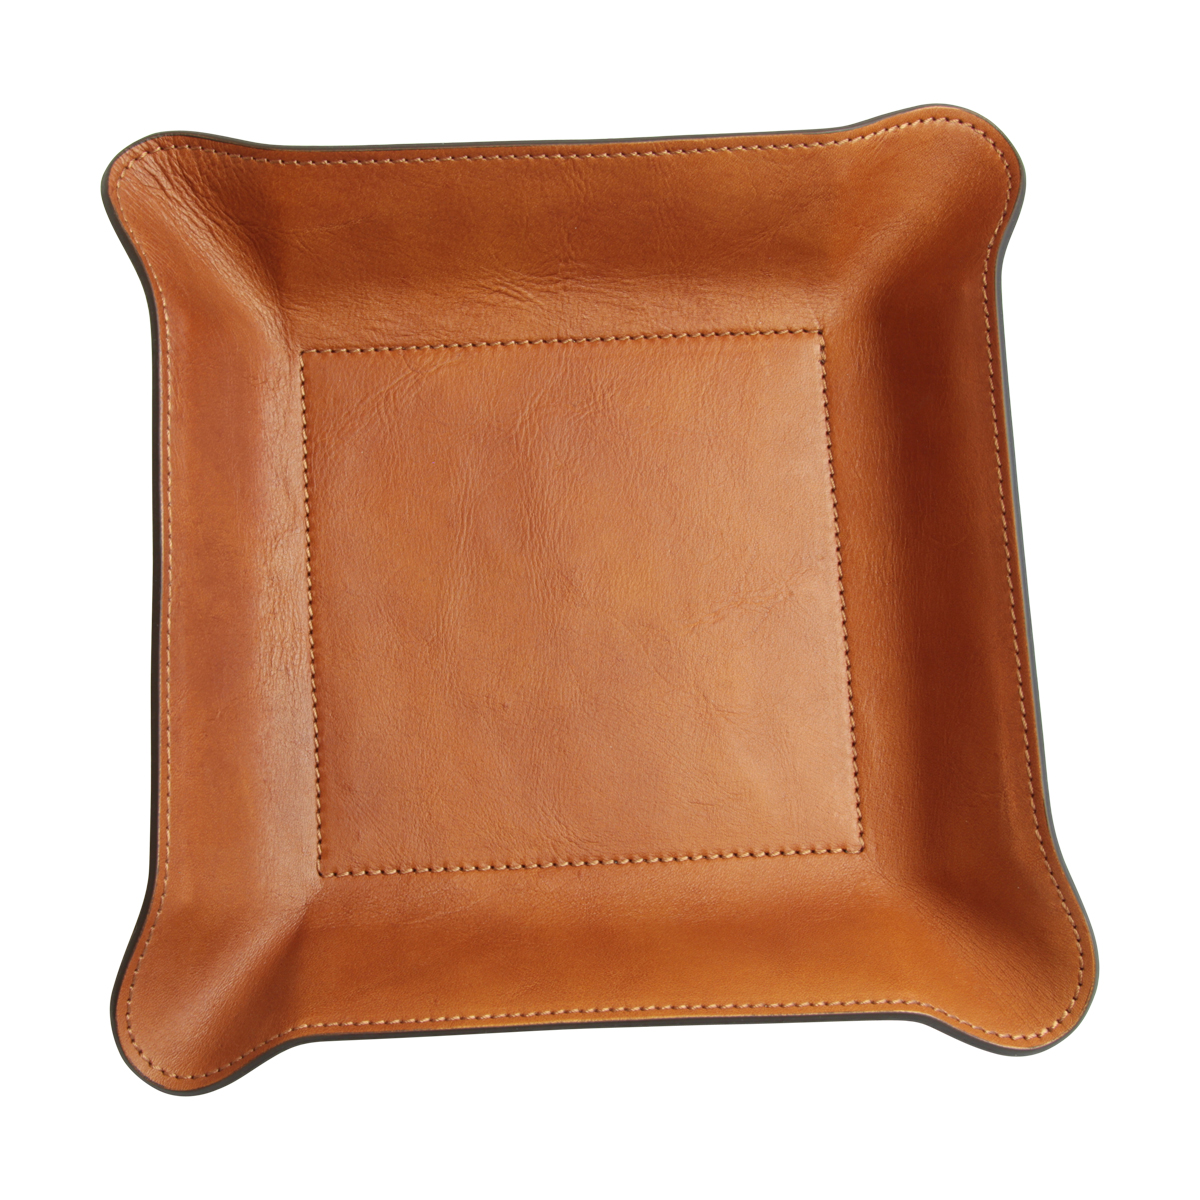 Leather Catchall Tray - Colonial Brown | 751089CO UK | Old Angler Firenze